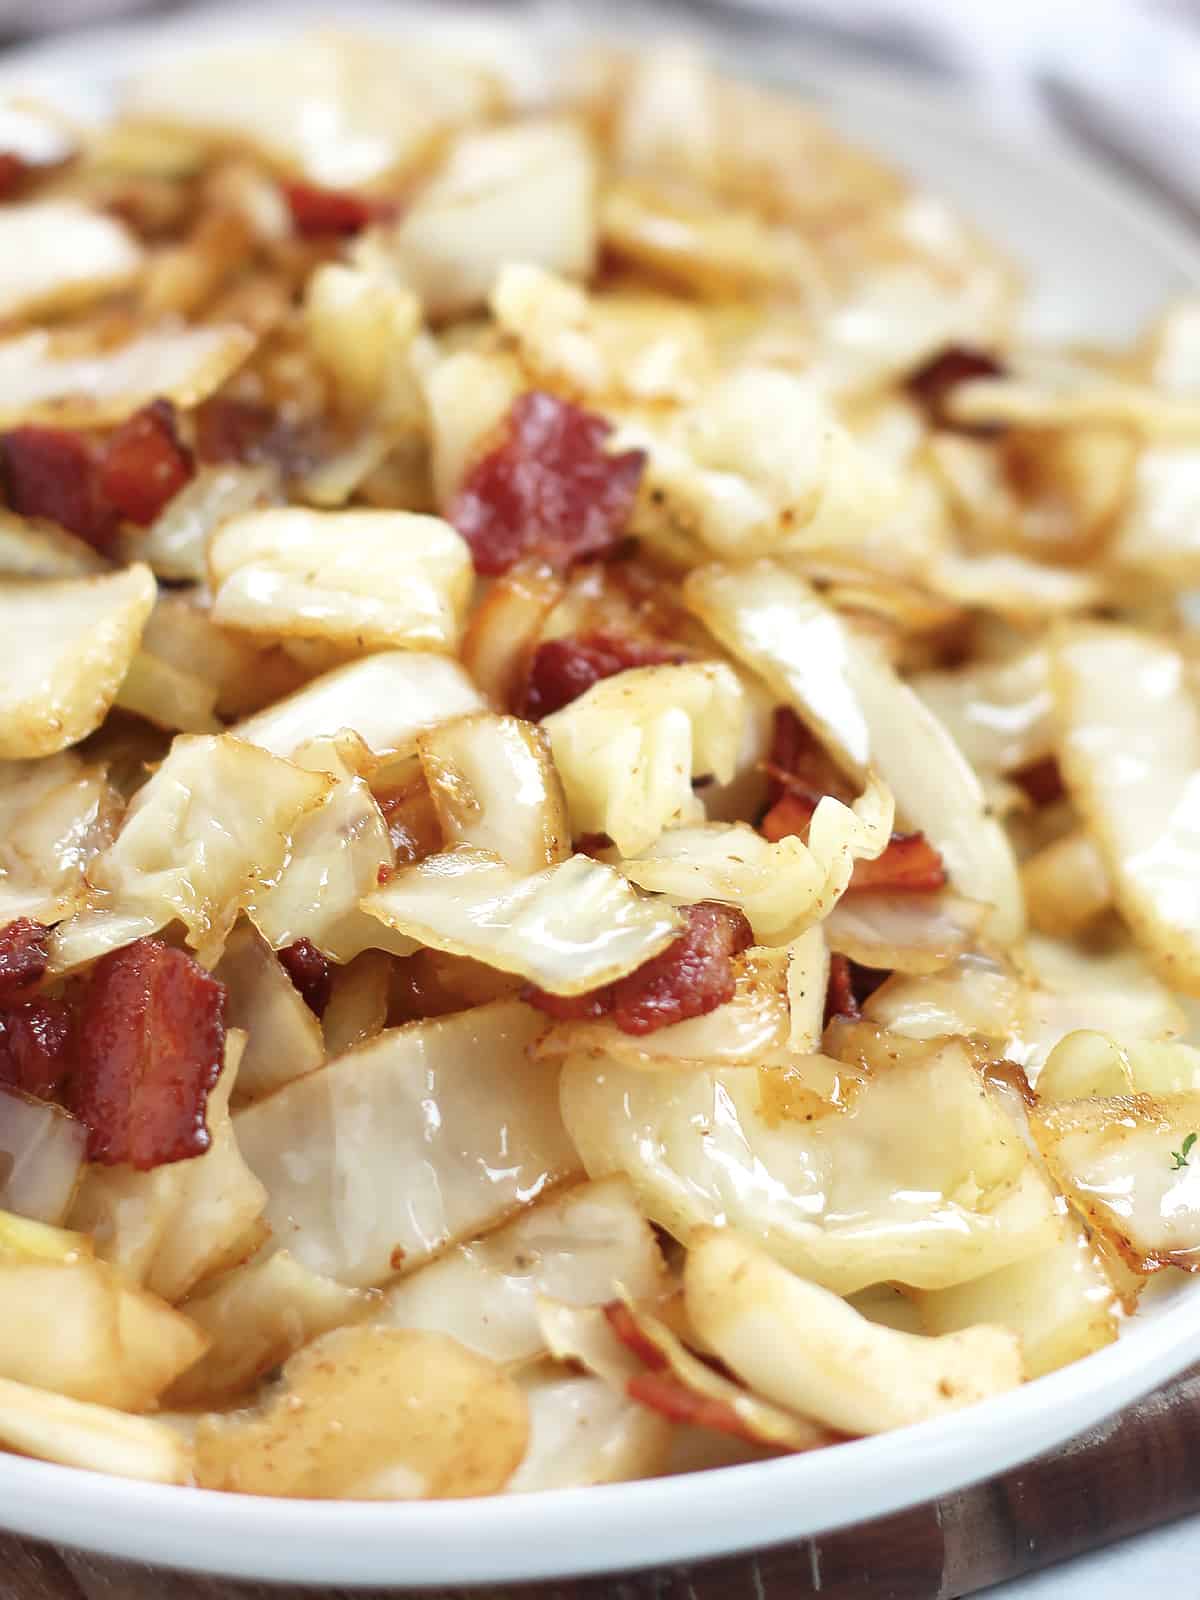 Shredded cabbage and fried bacon.